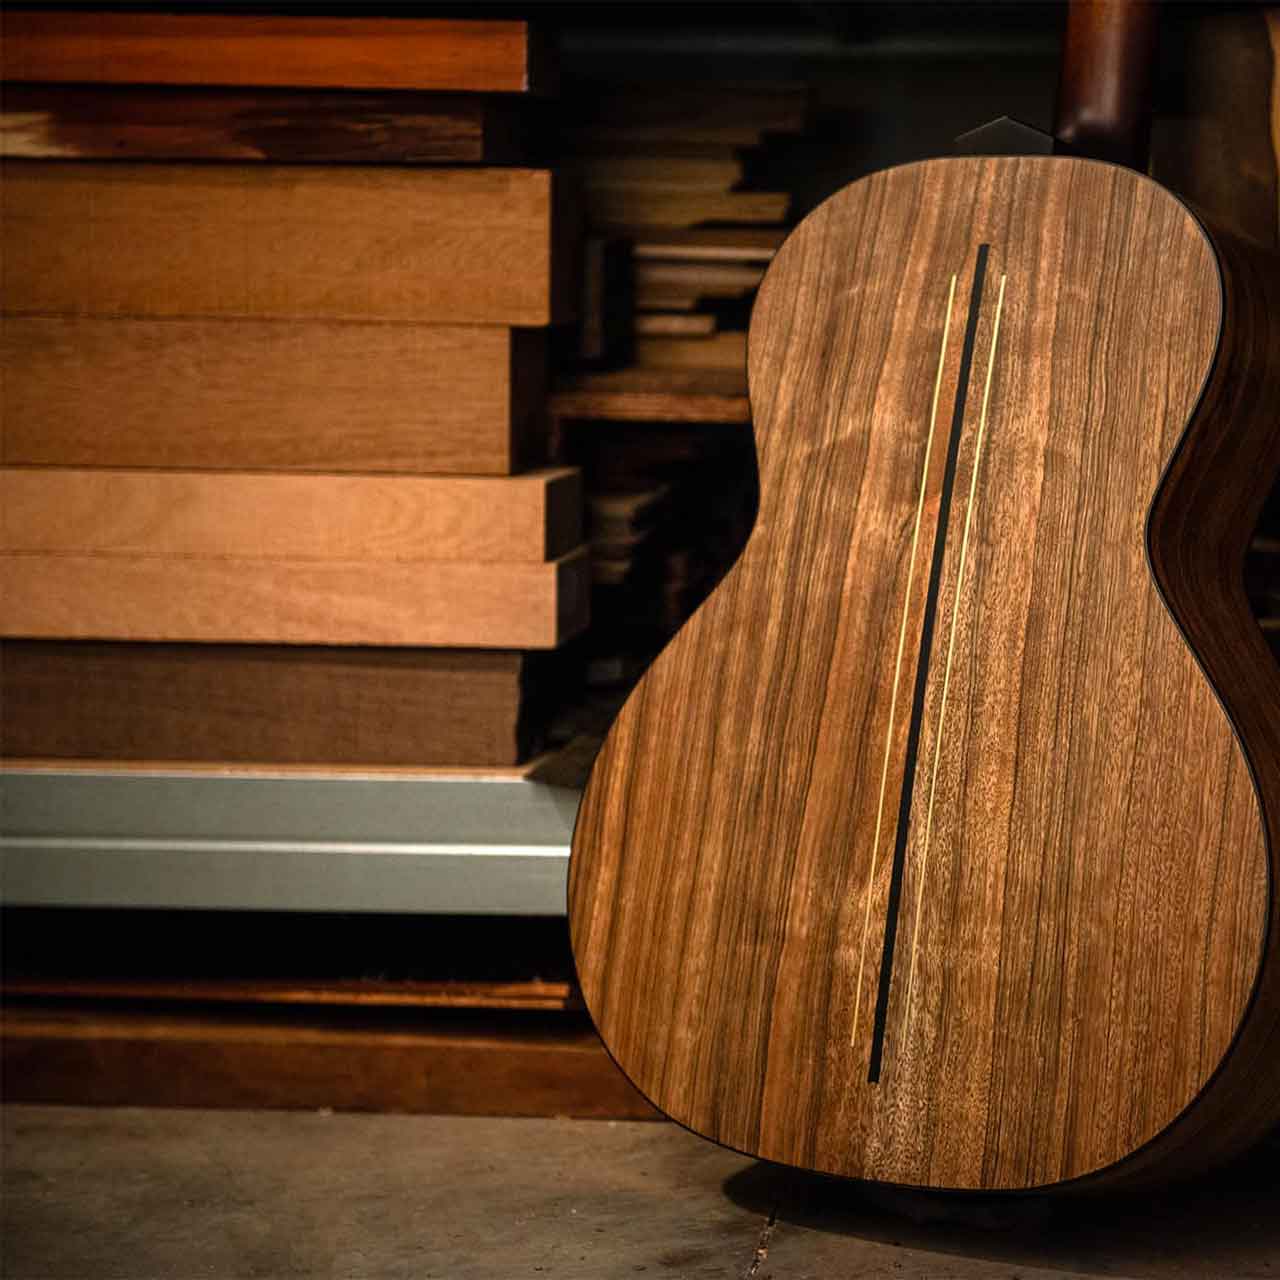 Blind Guitars Interview 1 Great Lover of Beautiful ToneWoods Essences